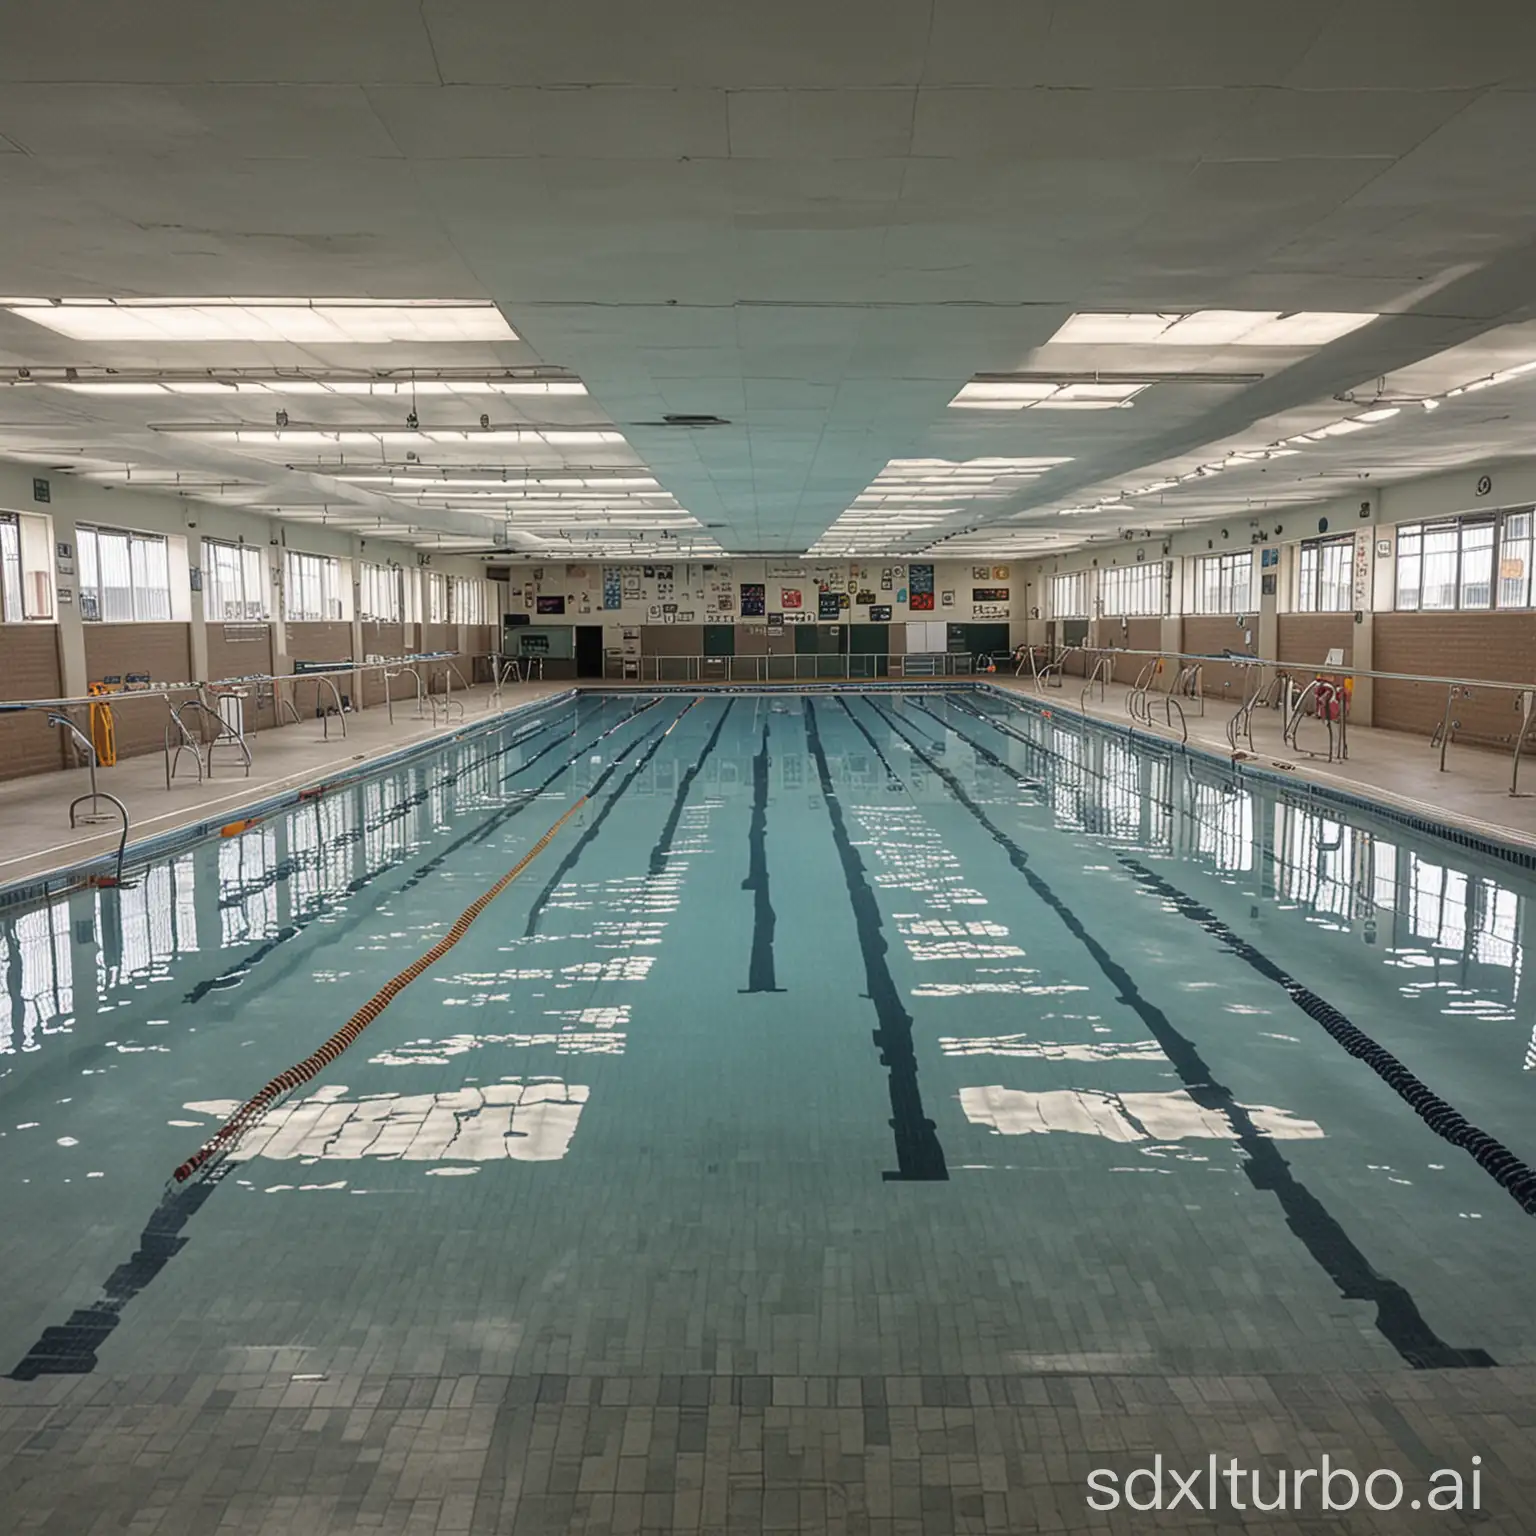 A school has a swimming pool